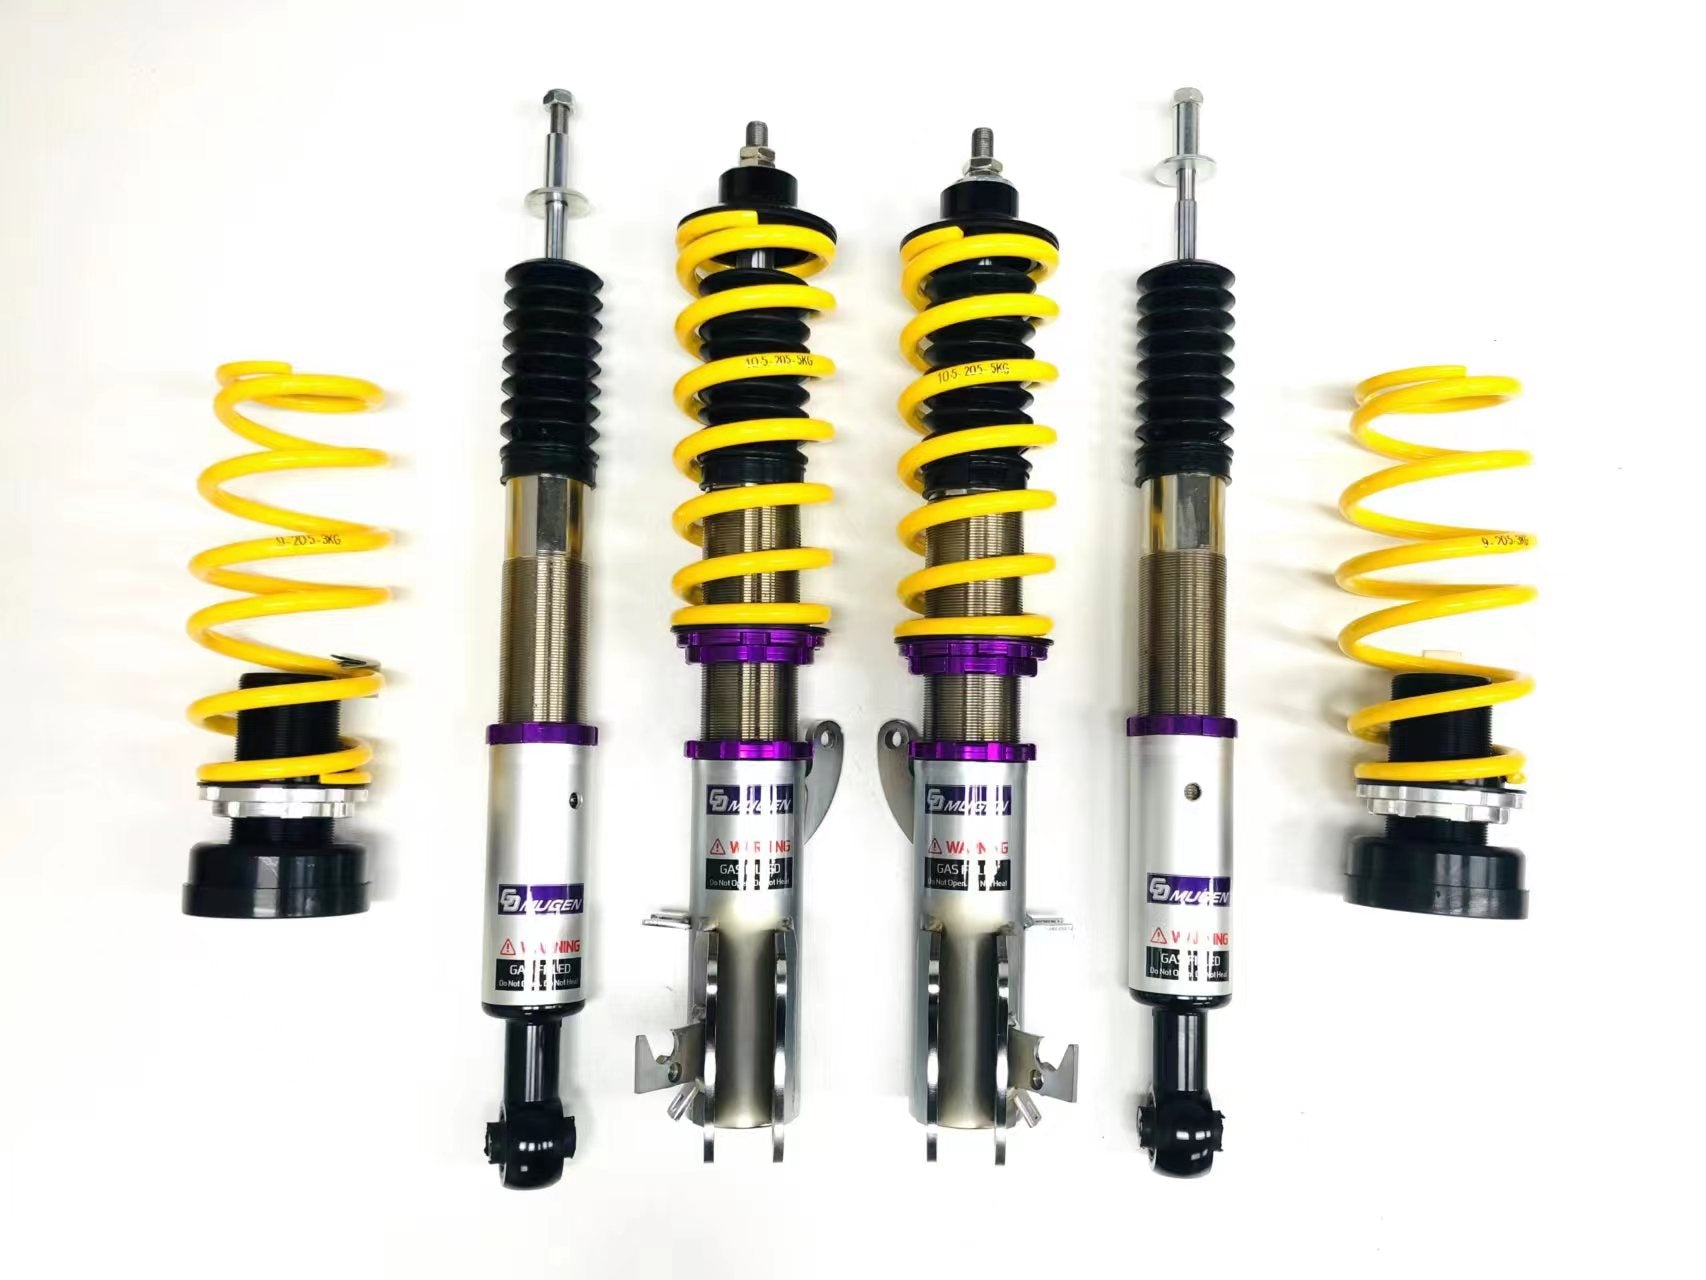 Gd Mugen Volkswagen Golf R (Without Dcc) 09-up Mk6/a6 Street Comfort Pro Coilovers